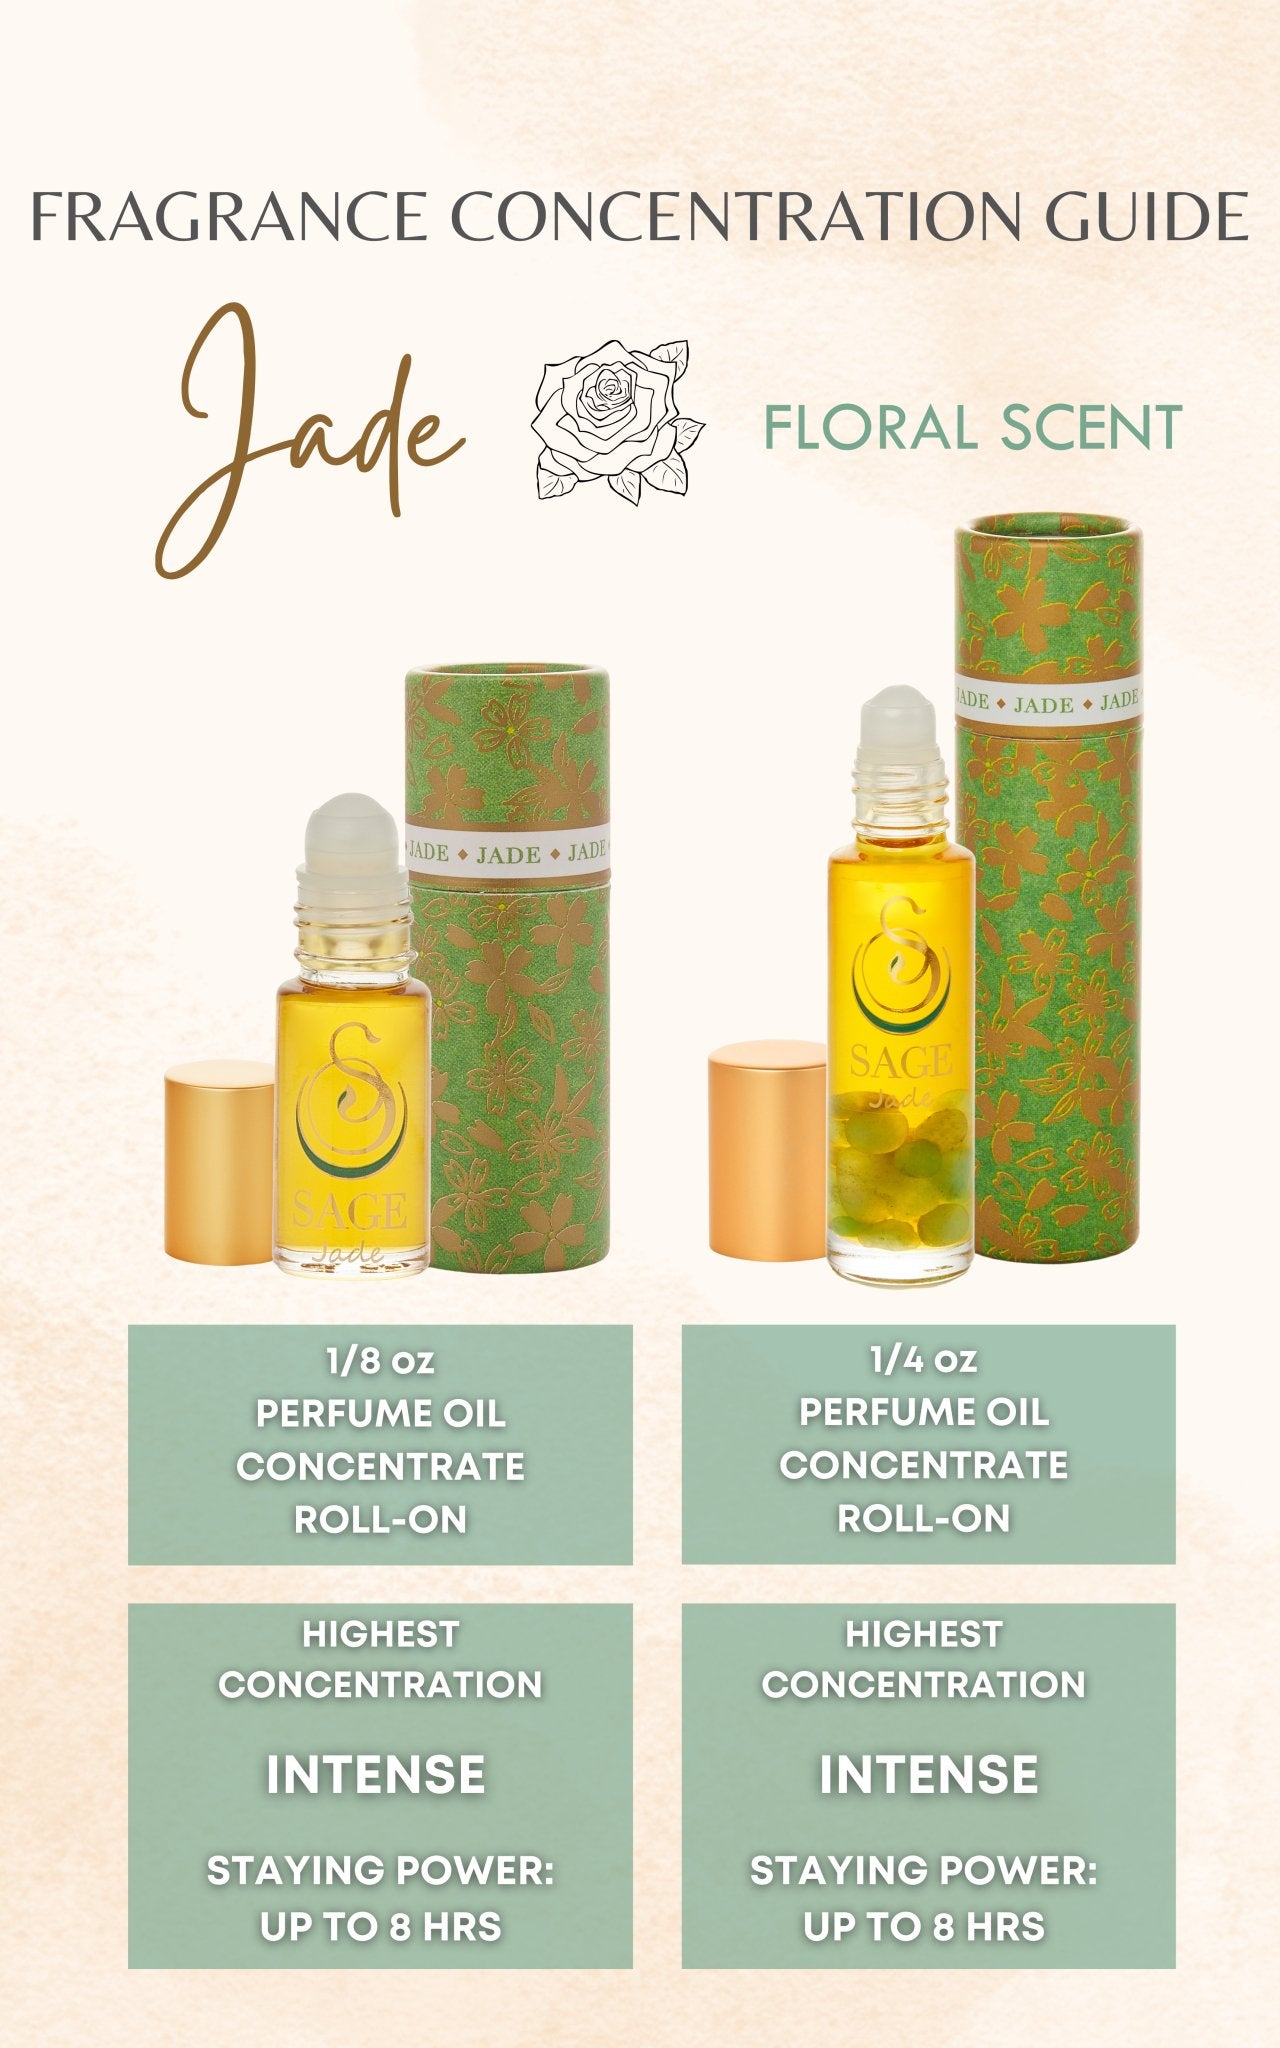 Jade 1/8 oz Perfume Oil Concentrate Roll-On by Sage - The Sage Lifestyle